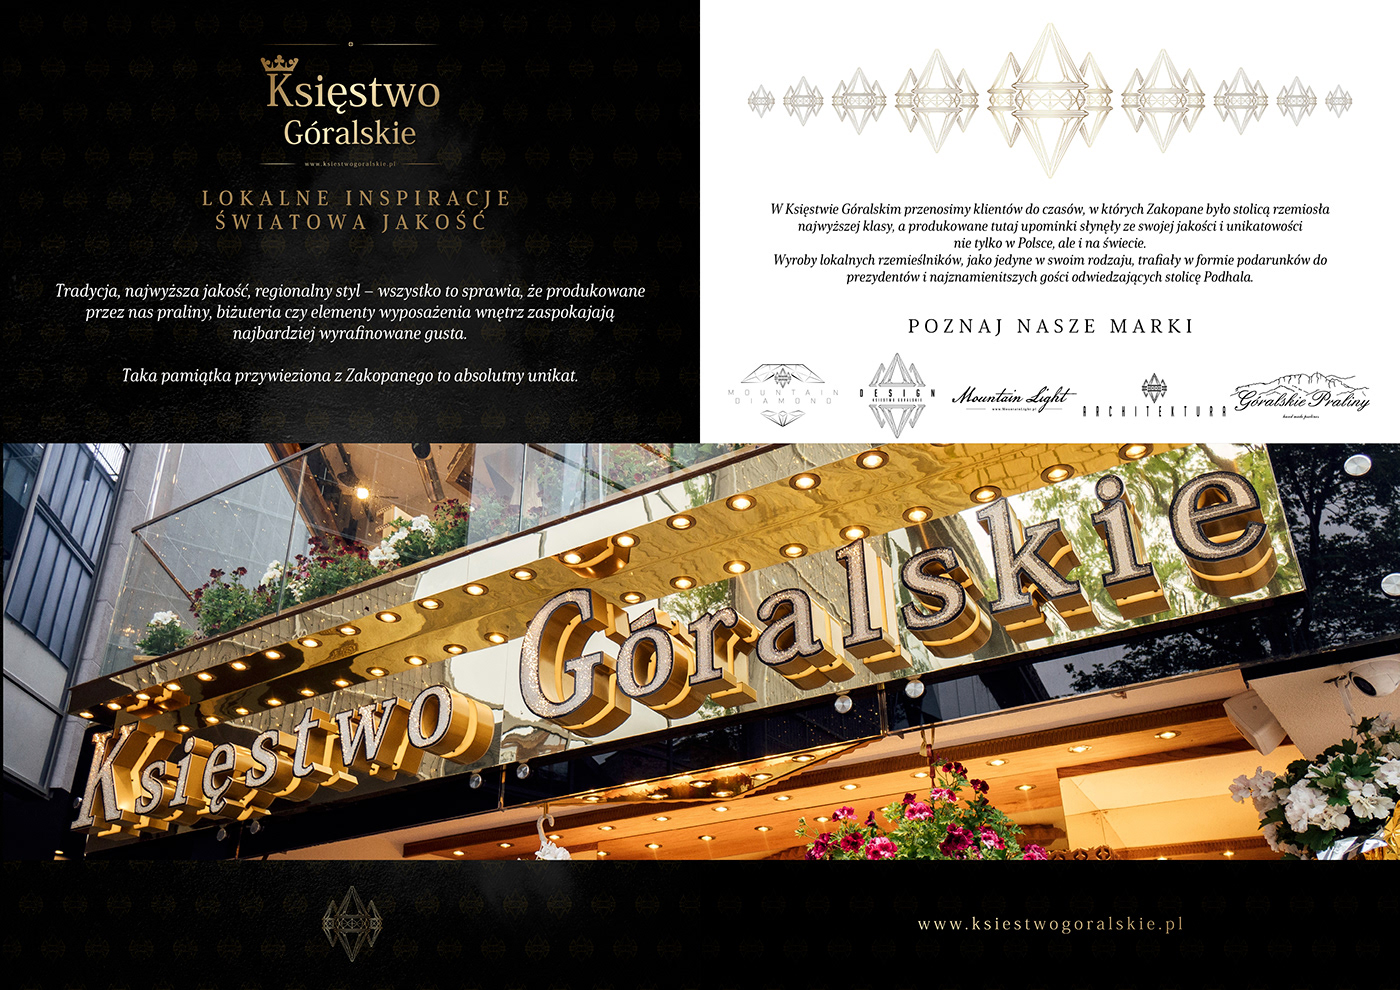 Catalog design for "Księstwo Góralskie" with jewelry, clothing, furniture, diamonds, car rims, gold 